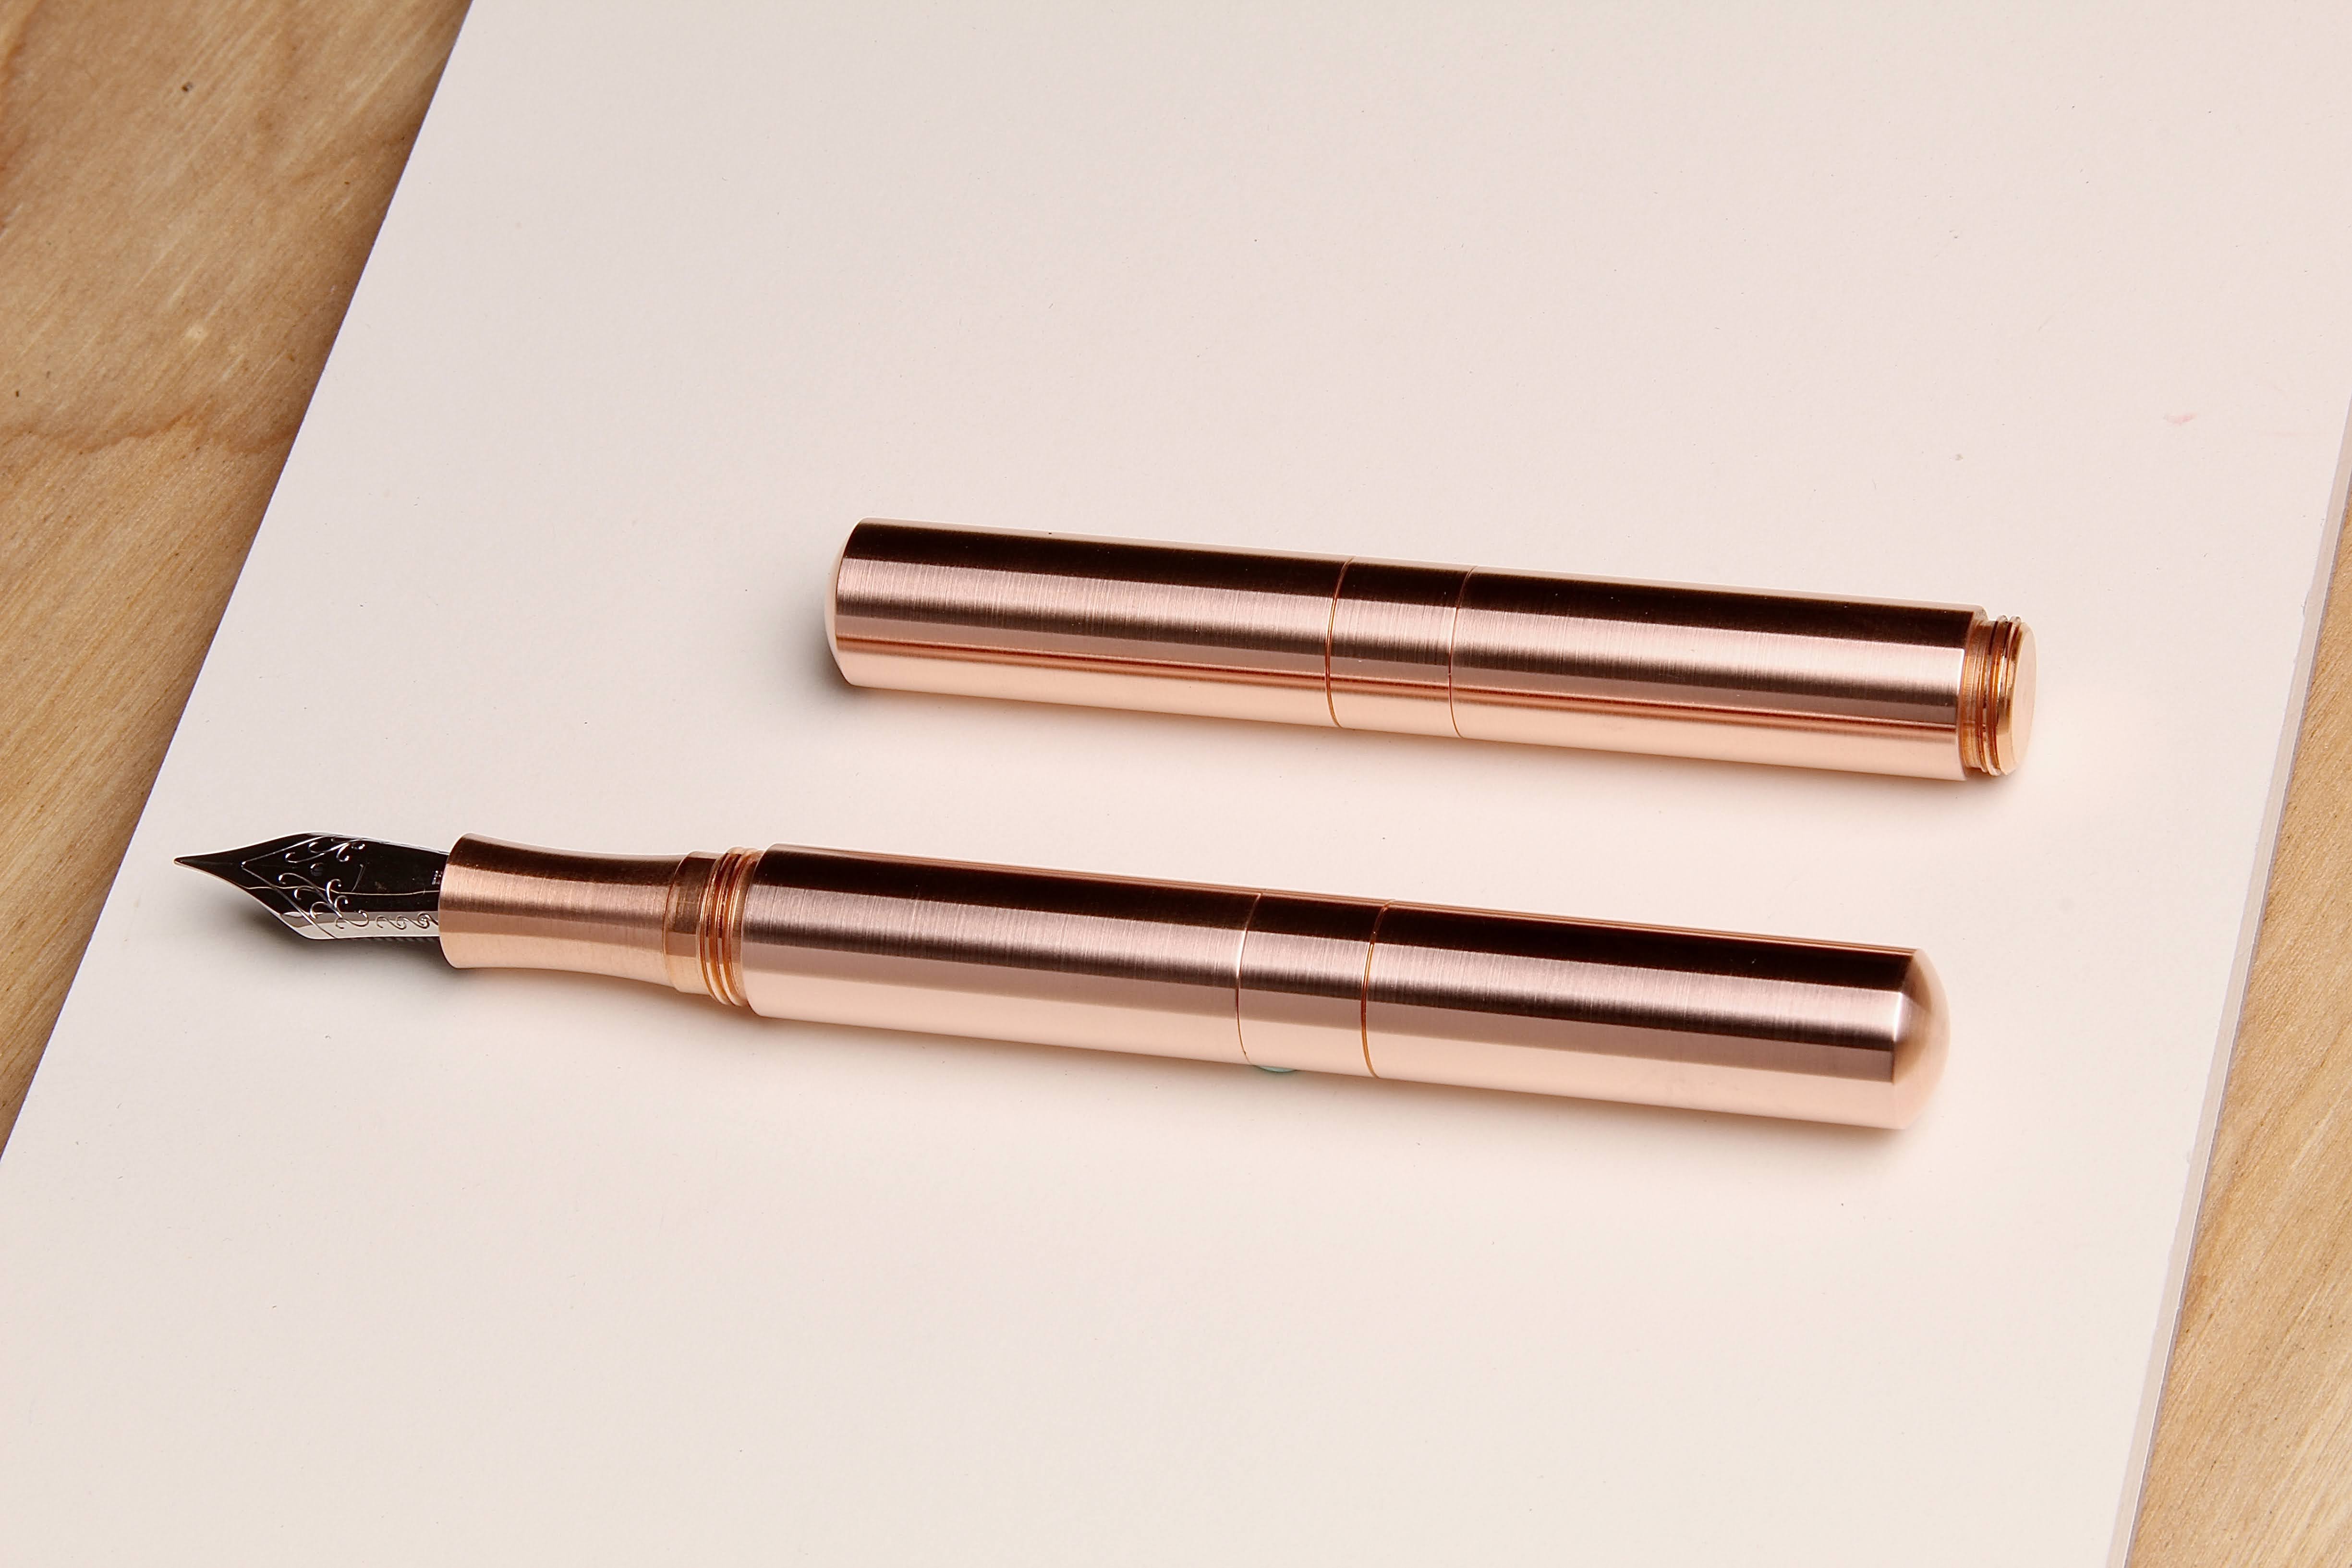 Solid Copper and Faceted Copper  "Pocket Six" Fountain Pen